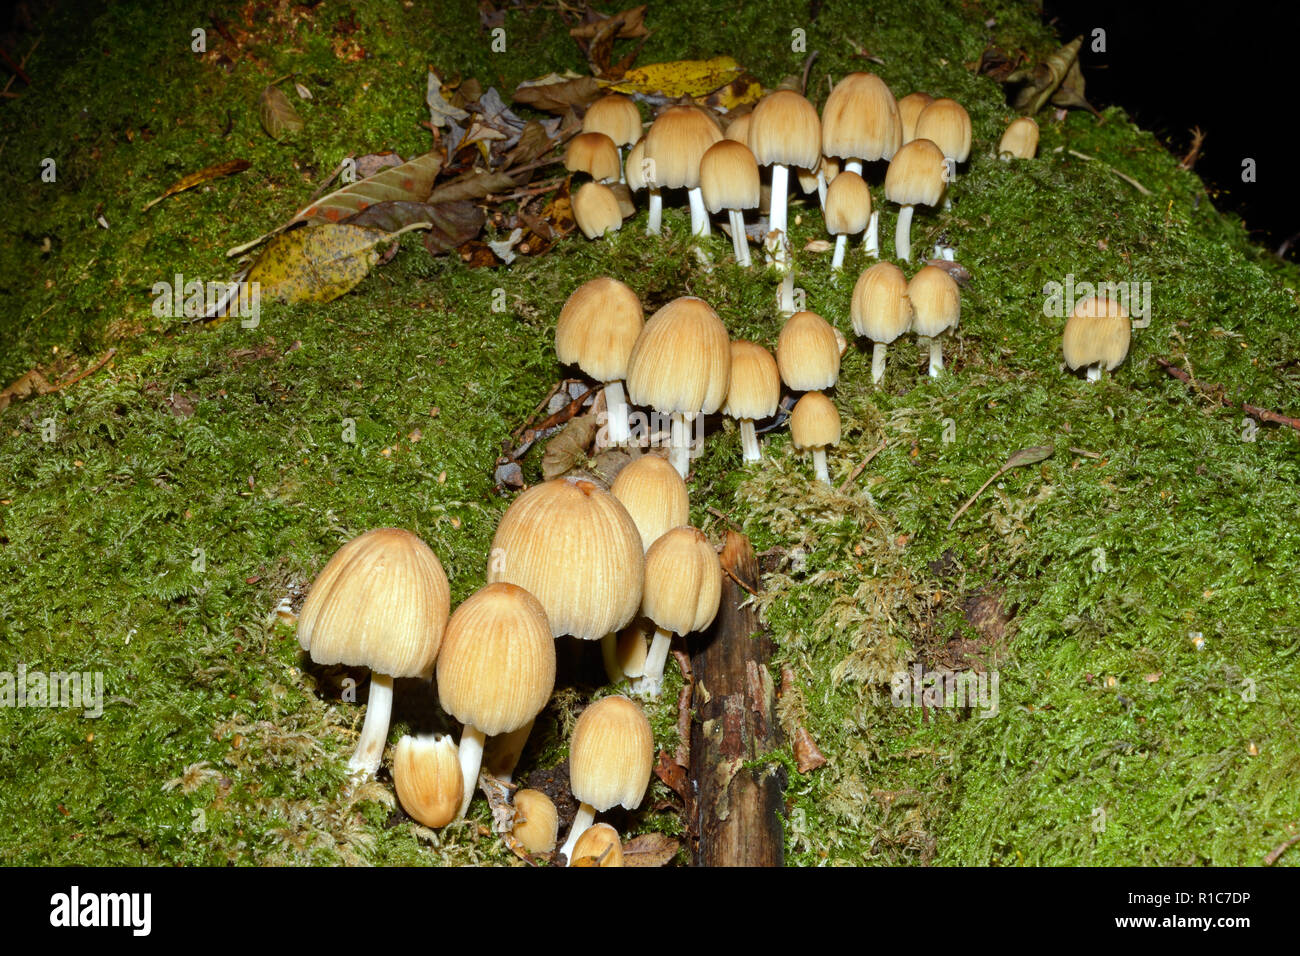 Coprinellus micaceus is a common fungus in the family Psathyrellaceae often found on stumps or logs of broad-leaved trees. Stock Photo